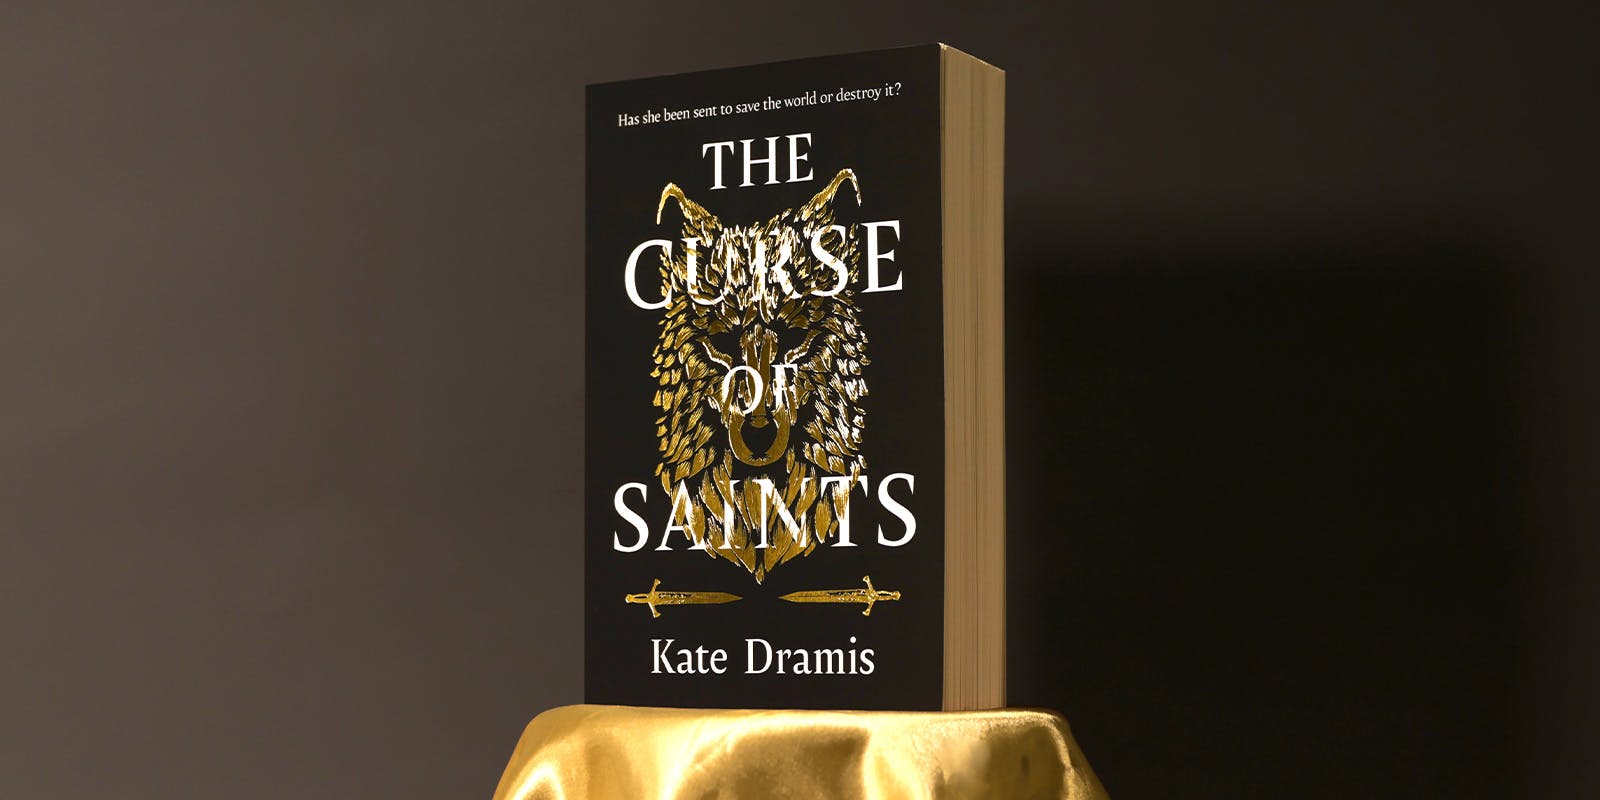 The unlikely way Kate Dramis found her literary agent 